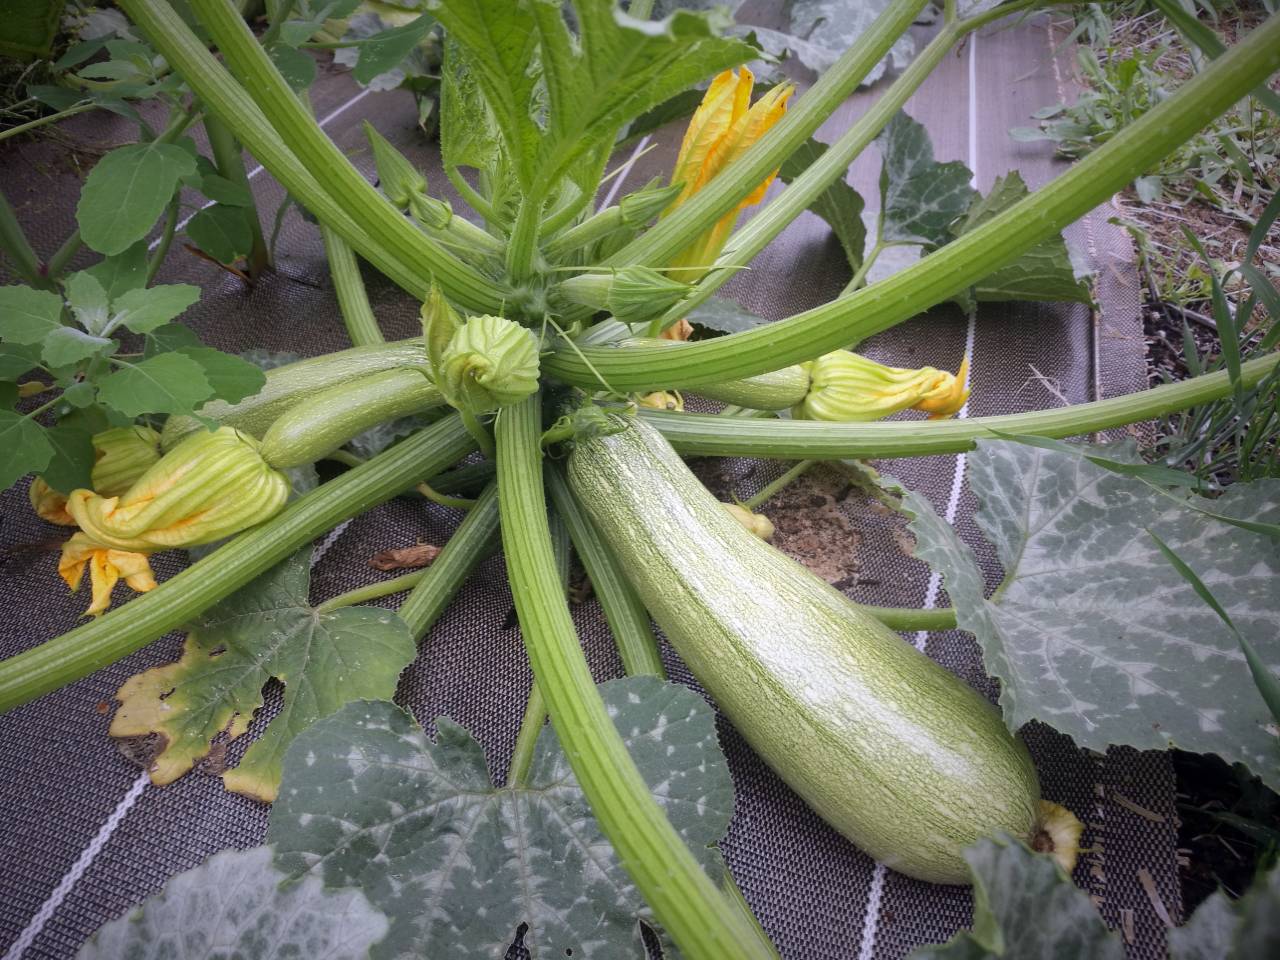 Courgette vert clair